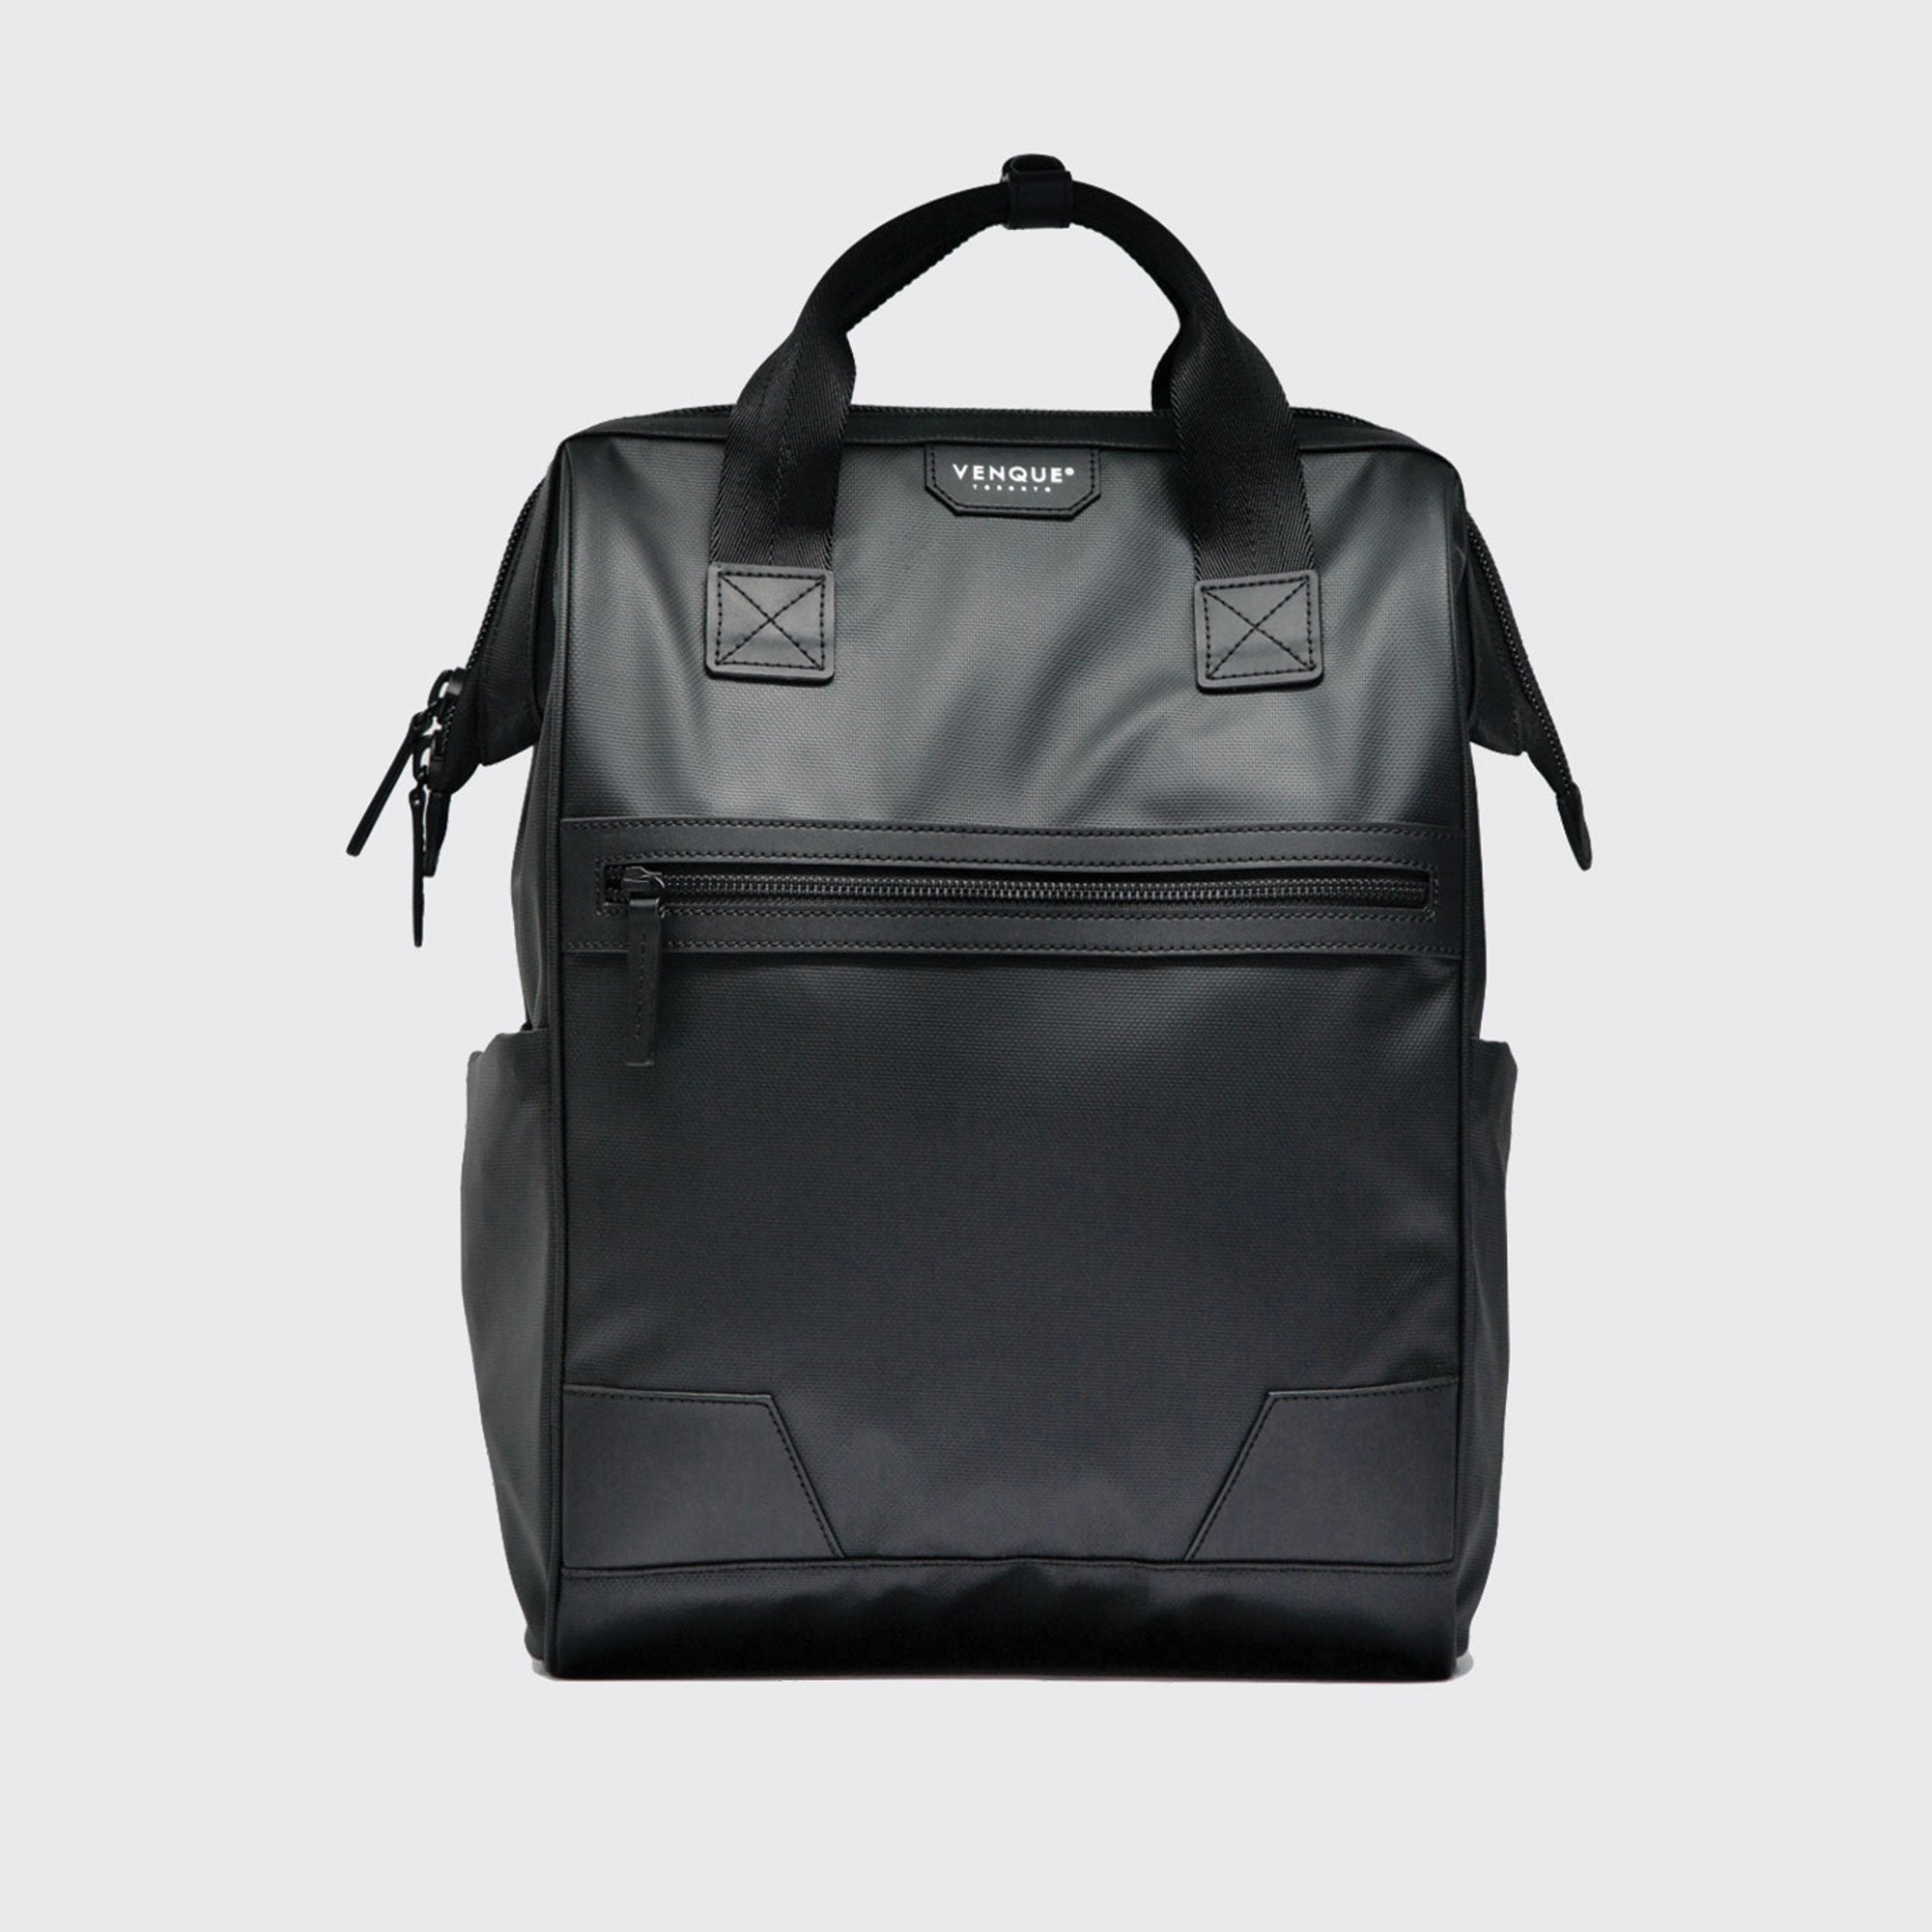 Black Airlight Backpack / Bag by Venque